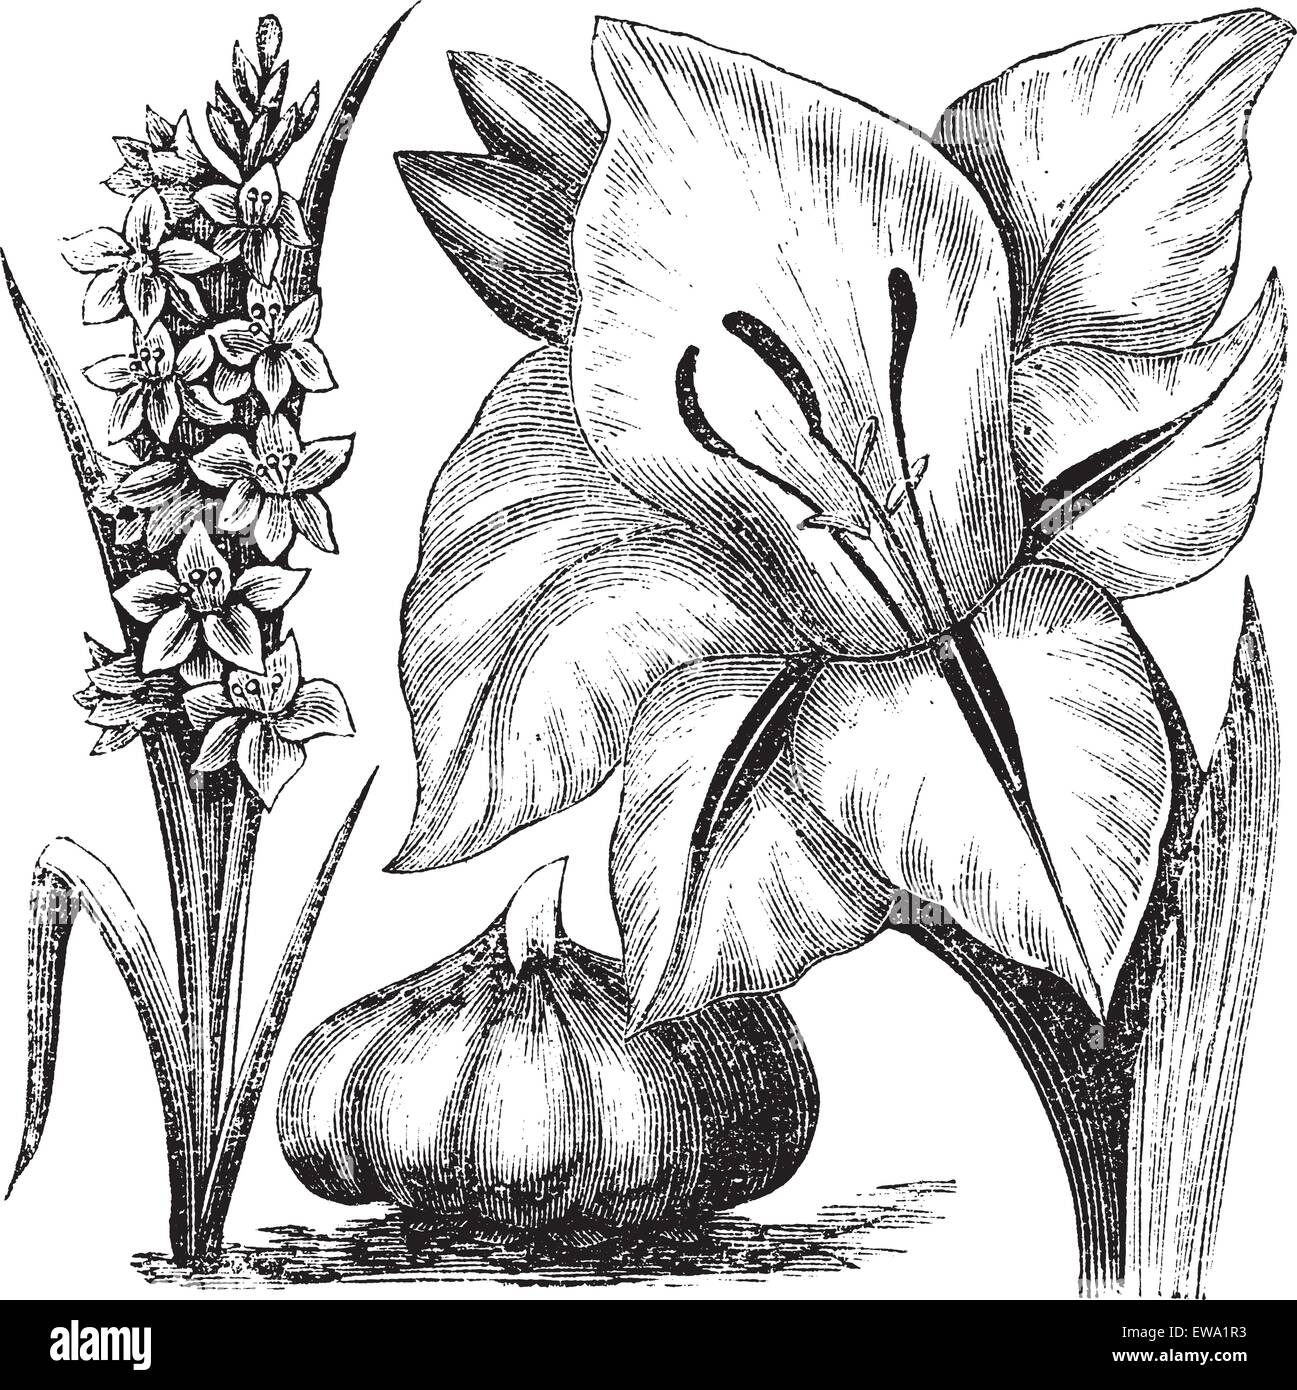 Gladiolus or sword lily, vintage engraving. Old engraved illustration of Gladiolus with Gladiolus communis, isolated on a white background. Stock Vector